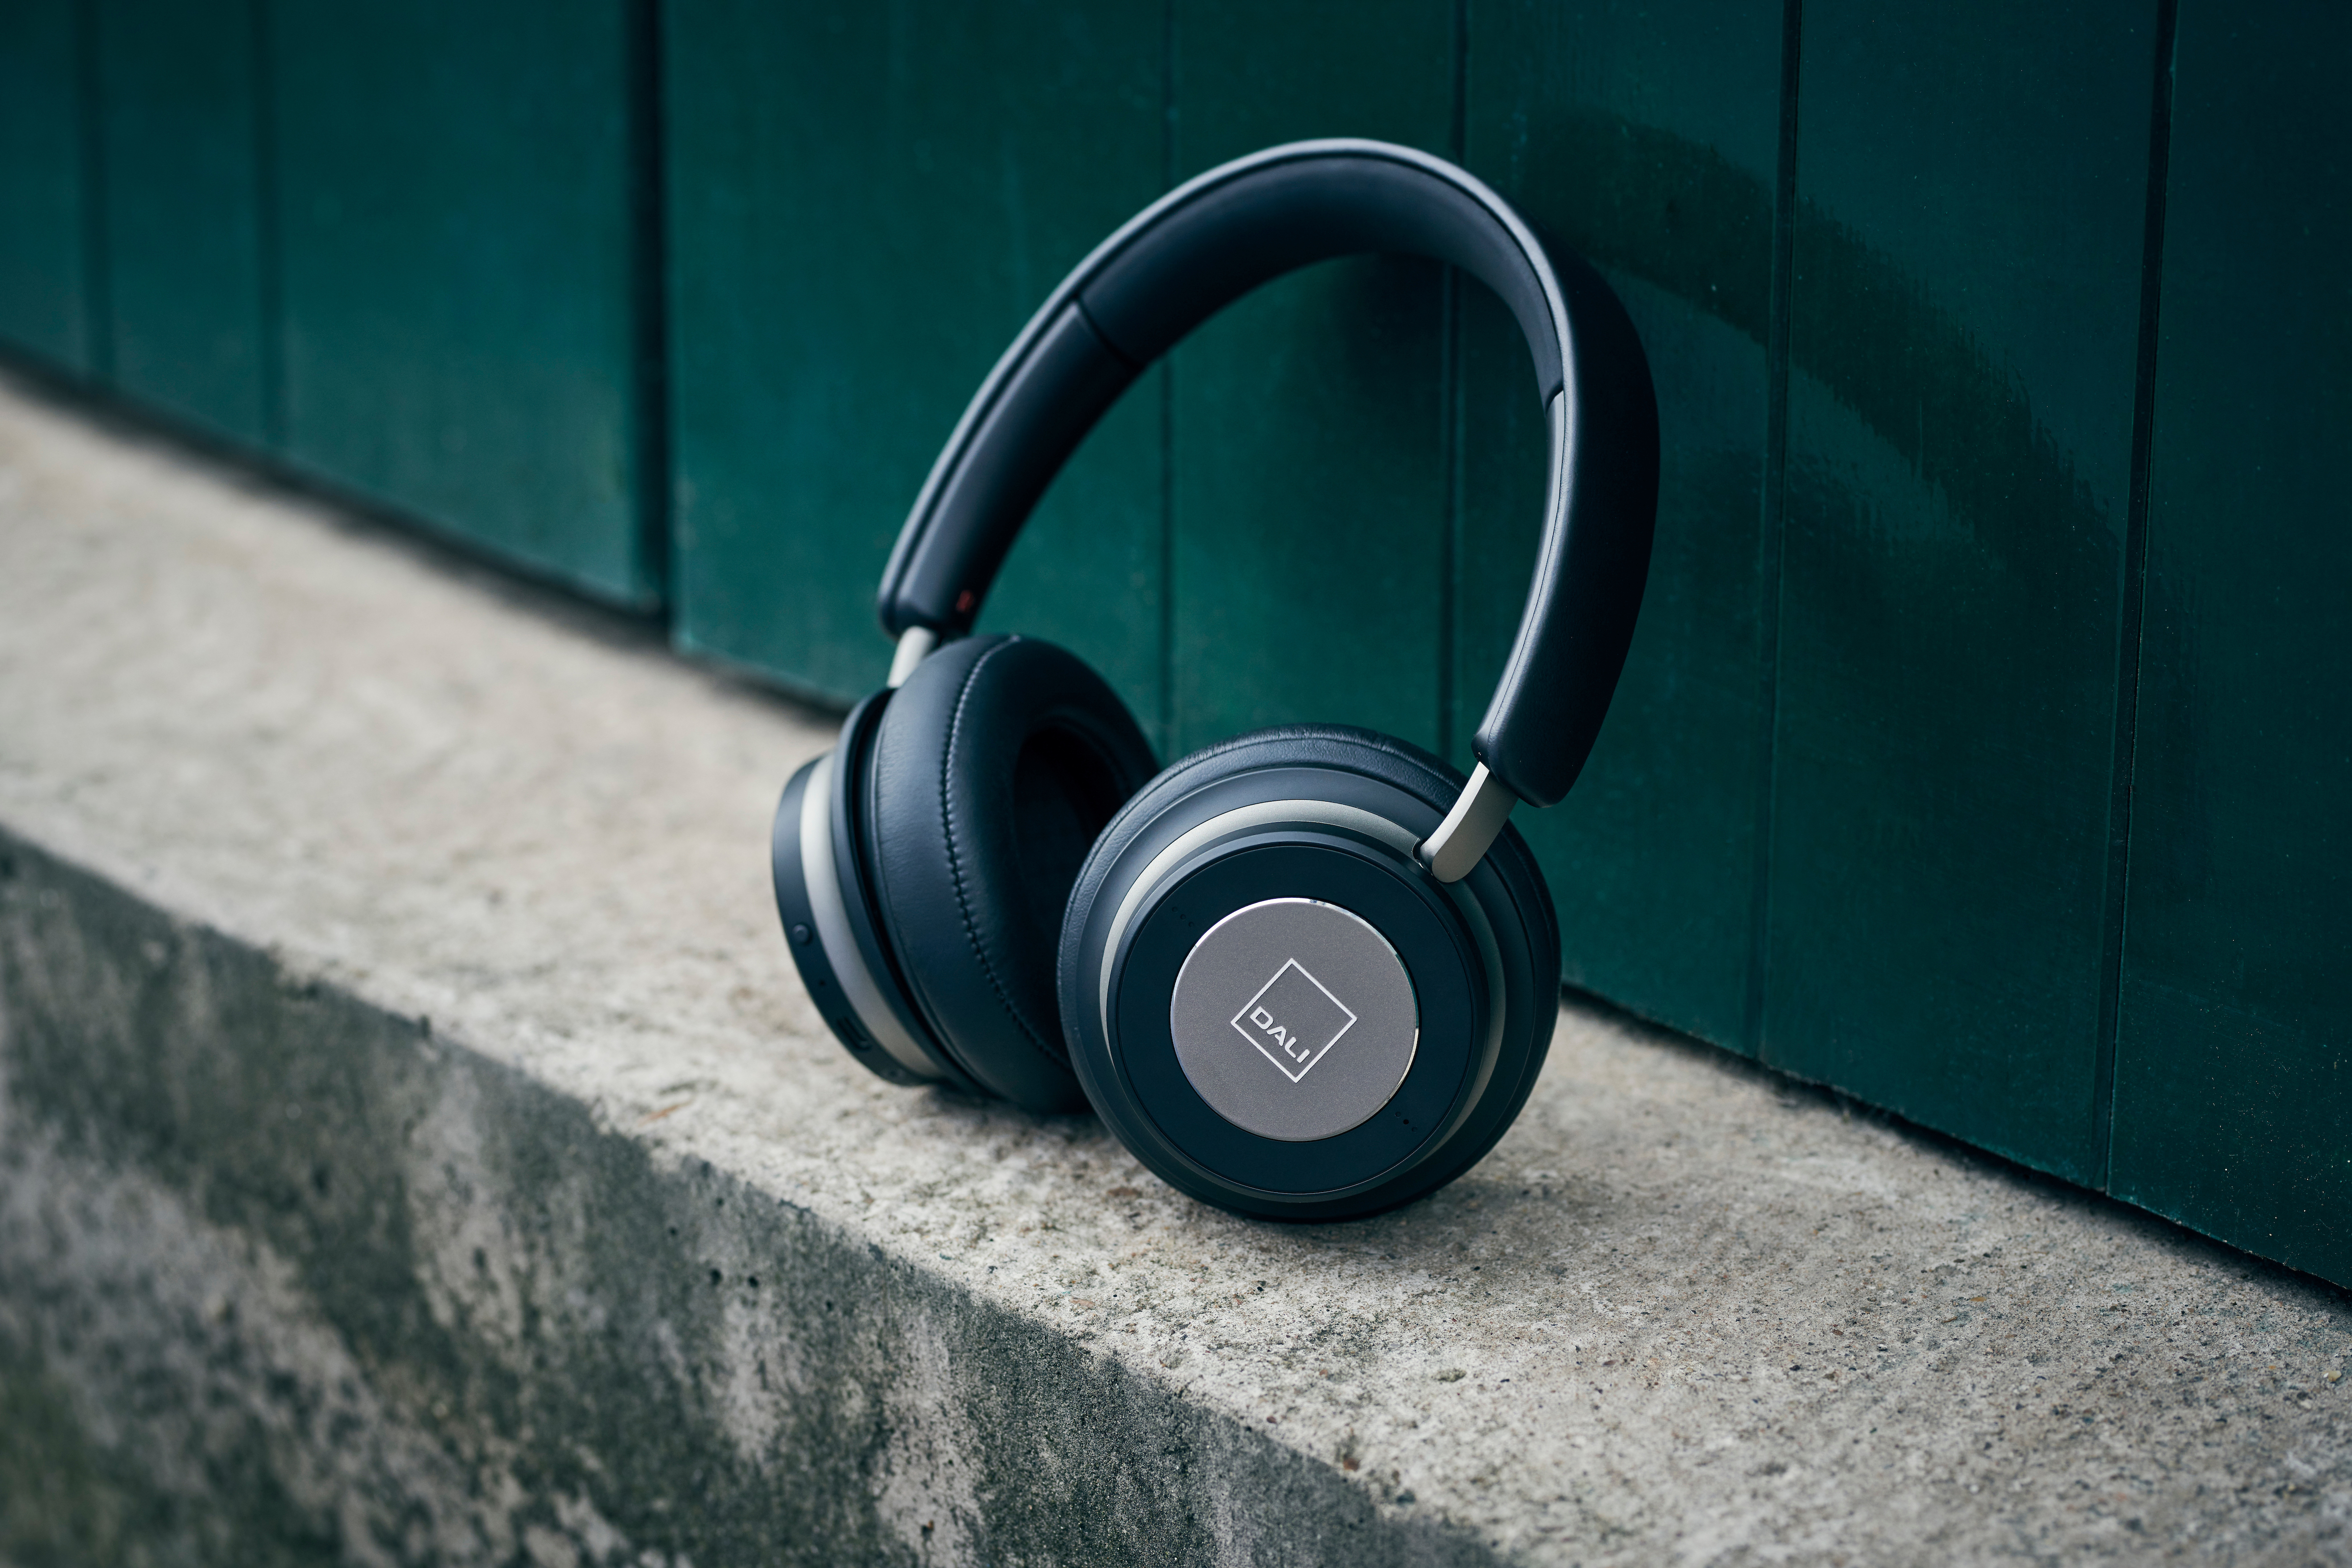 DALI IO-6 Premium Wireless Noise Cancelling Headphones Review: The Ultimate Work From Home Cans?